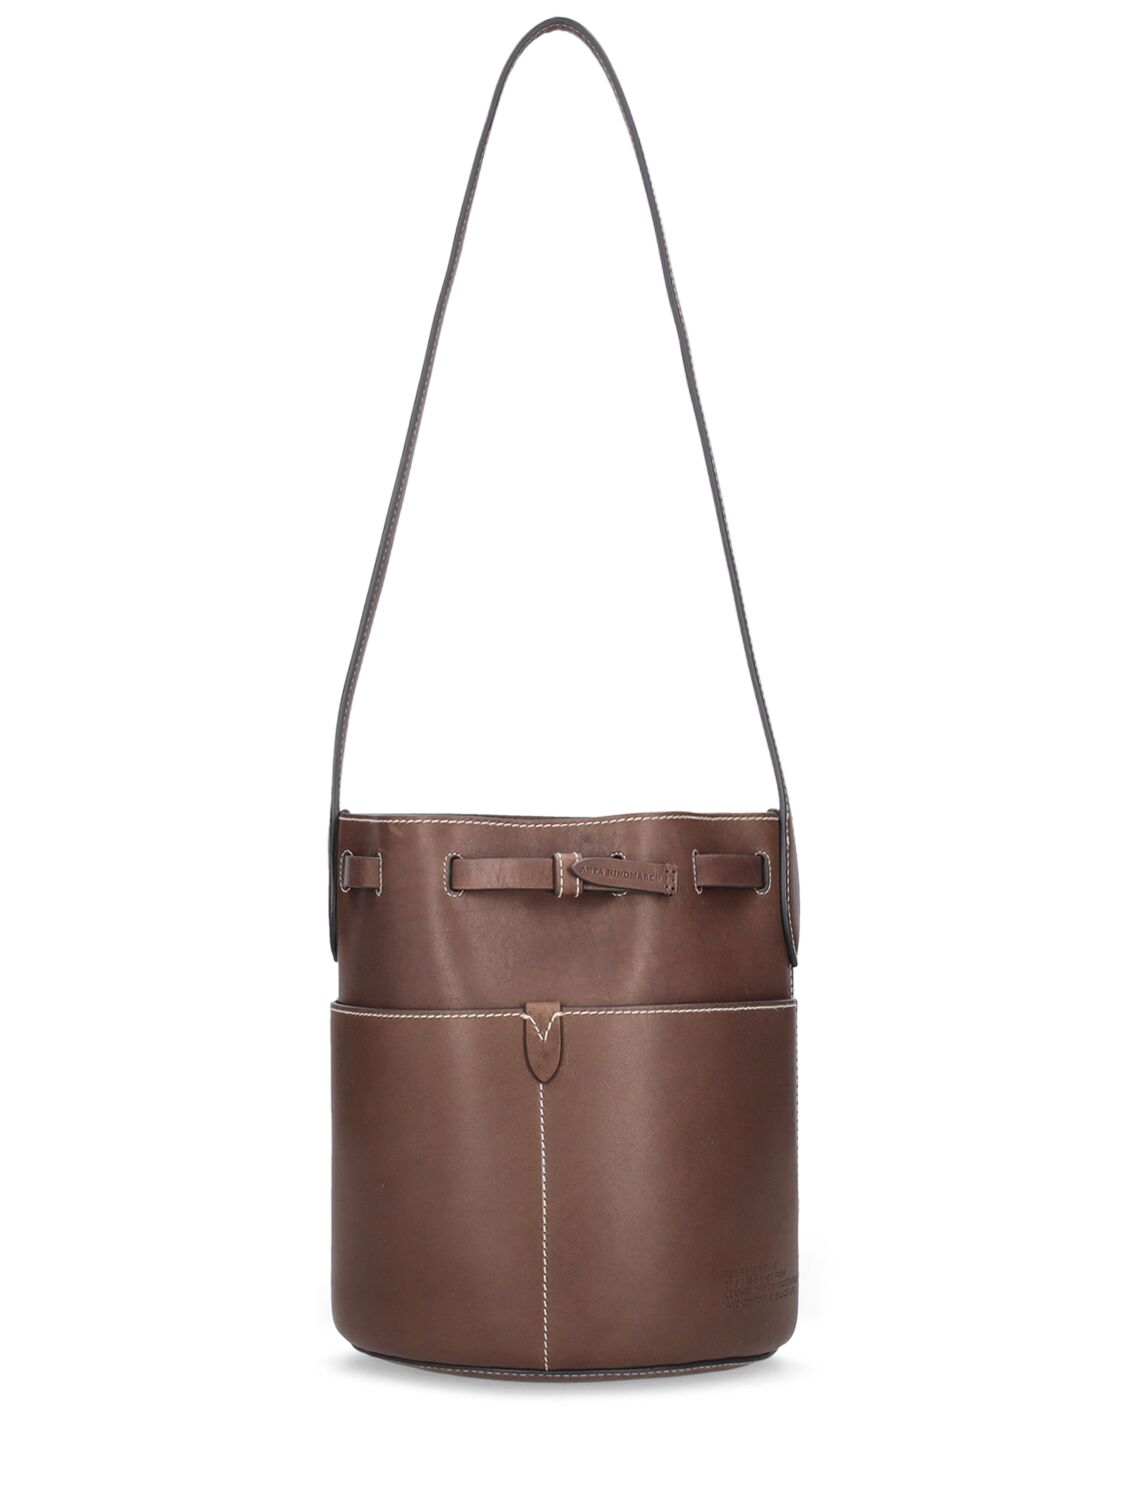 Anya Hindmarch Return To Nature Leather Bucket Bag In Truffle